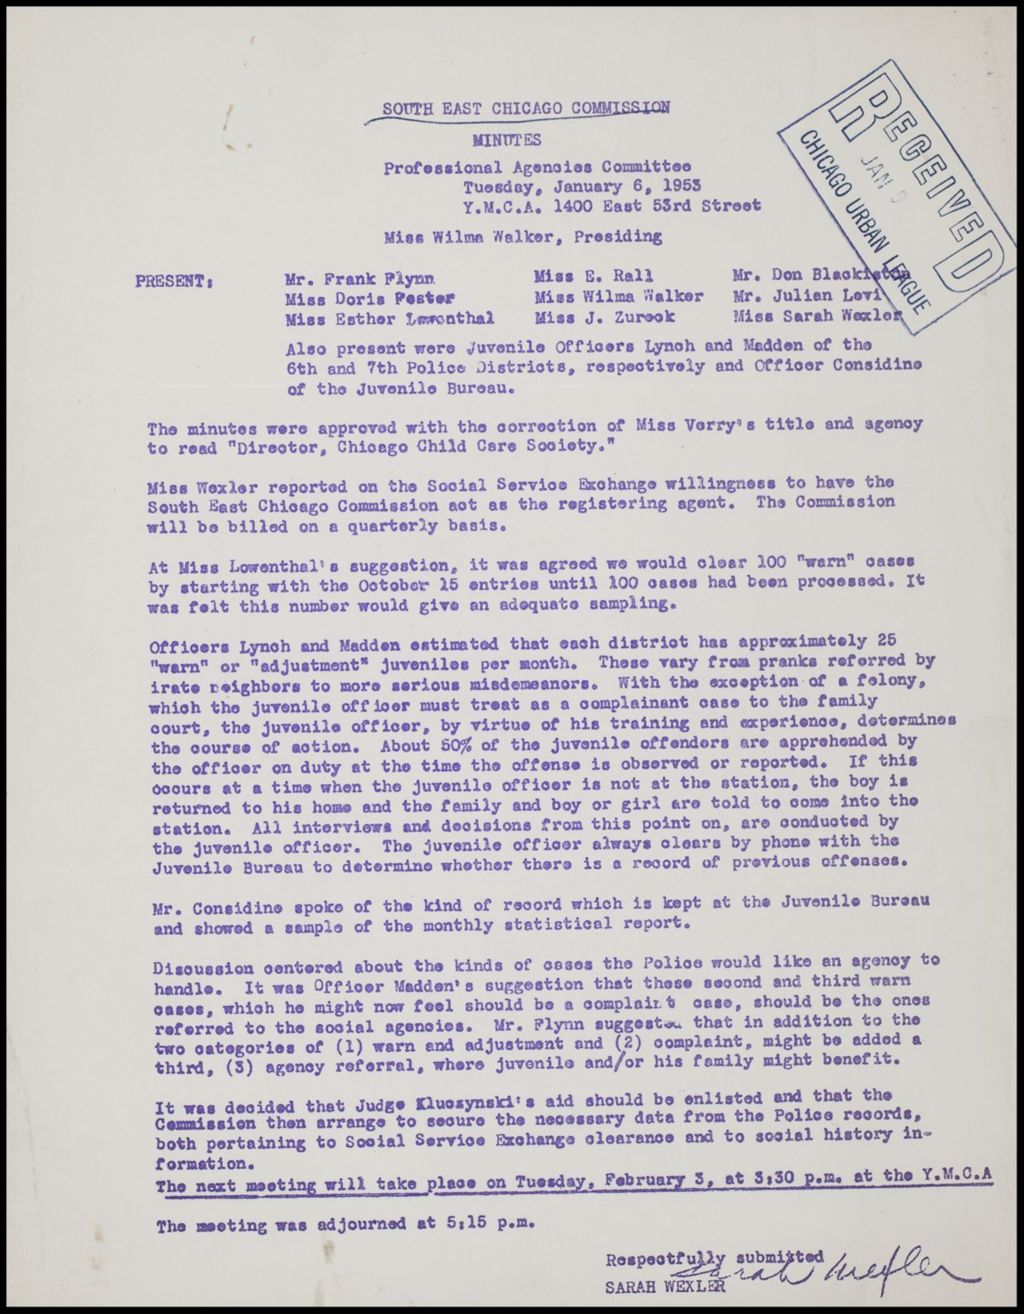 Miniature of South East Chicago Commission - Minutes of Professional Agencies Committee, 1953 (Folder II-2331)